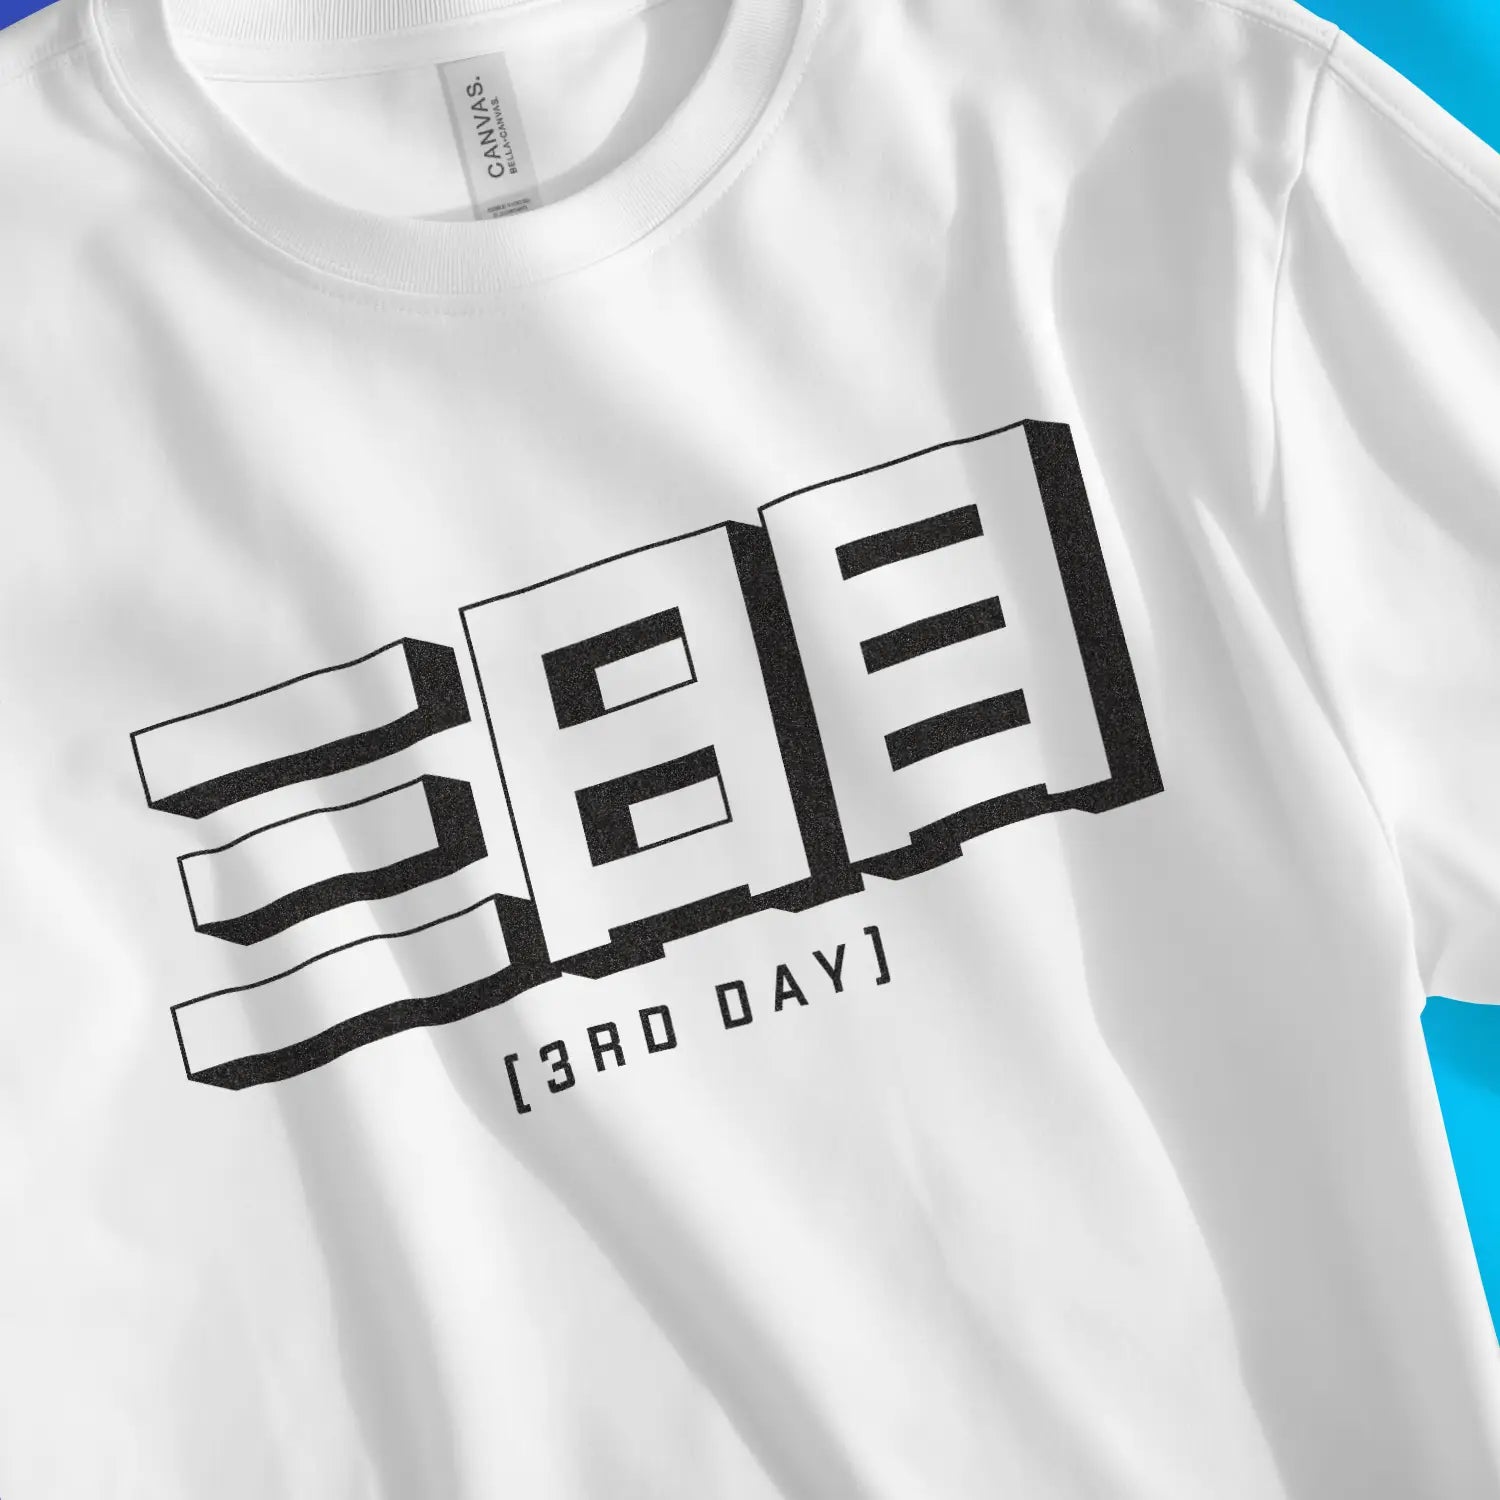 An image of 3rd Day (Japanese) | Premium Unisex Christian T-shirt available at 3rd Day Christian Clothing UK